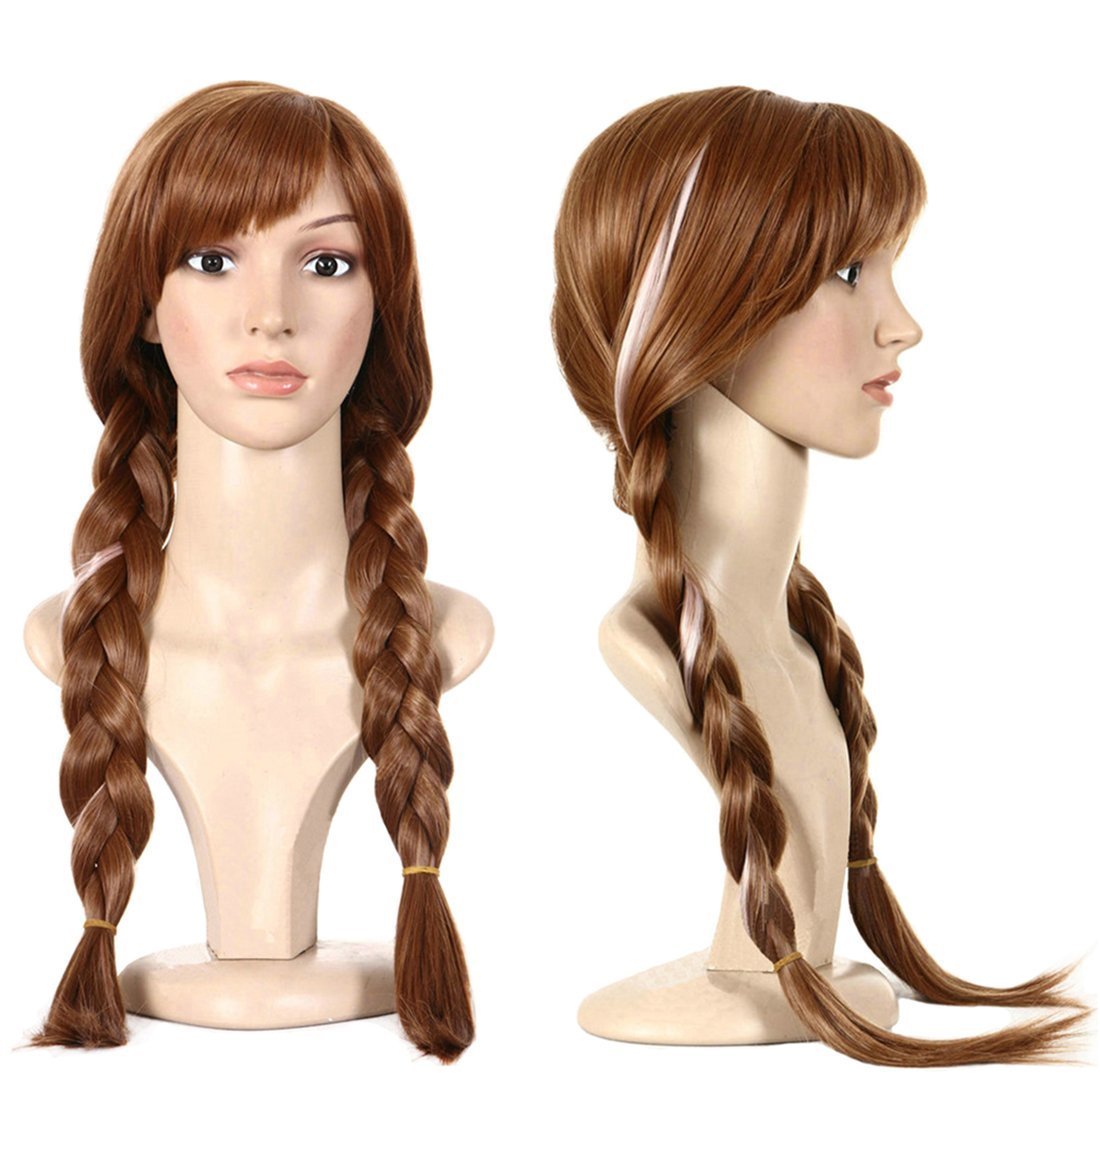 Price:$17.99    Anogol Hair Cap+Movie Braided Wig for Cosplay Wig Brown Braid Princess Wigs for Women Girls Halloween Costume (Brown,1-Pack)  Beauty